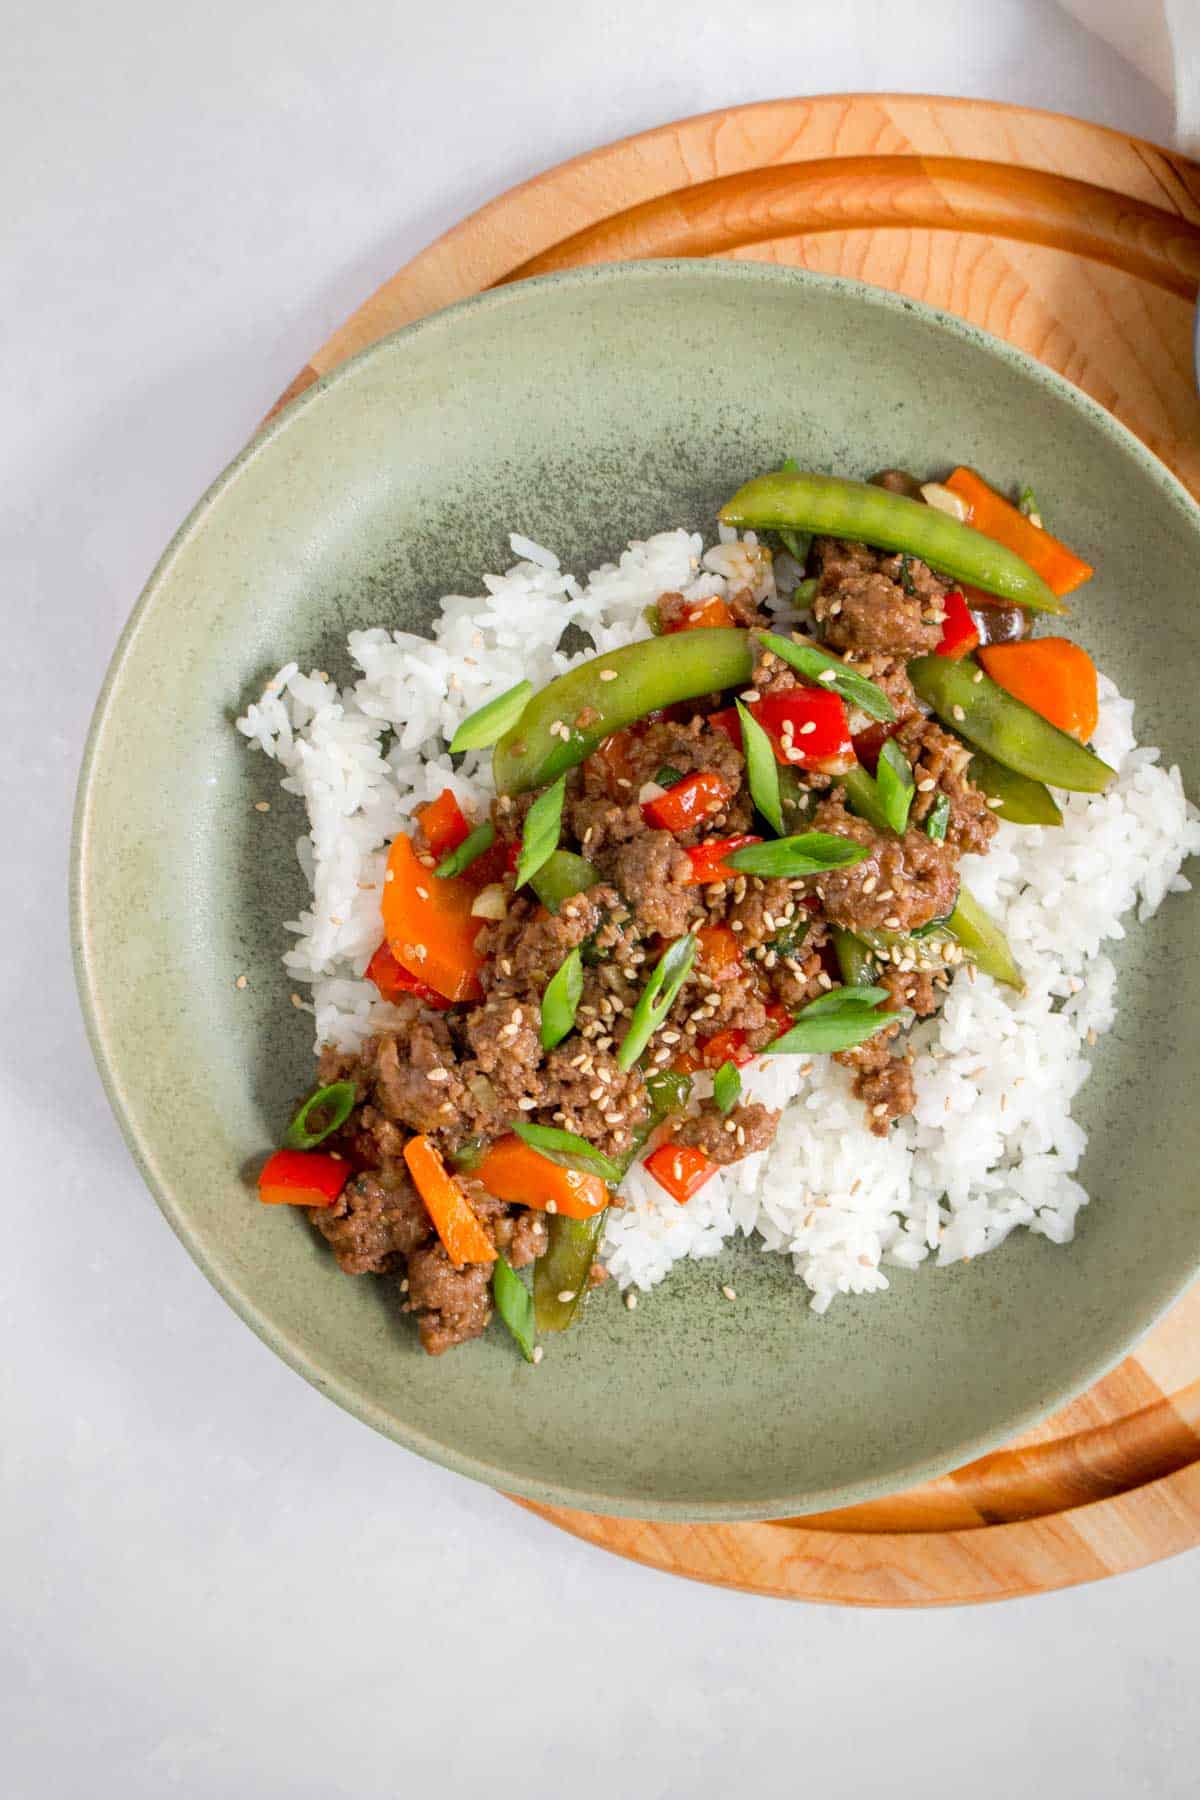 A plate of rice and beef stir fry.